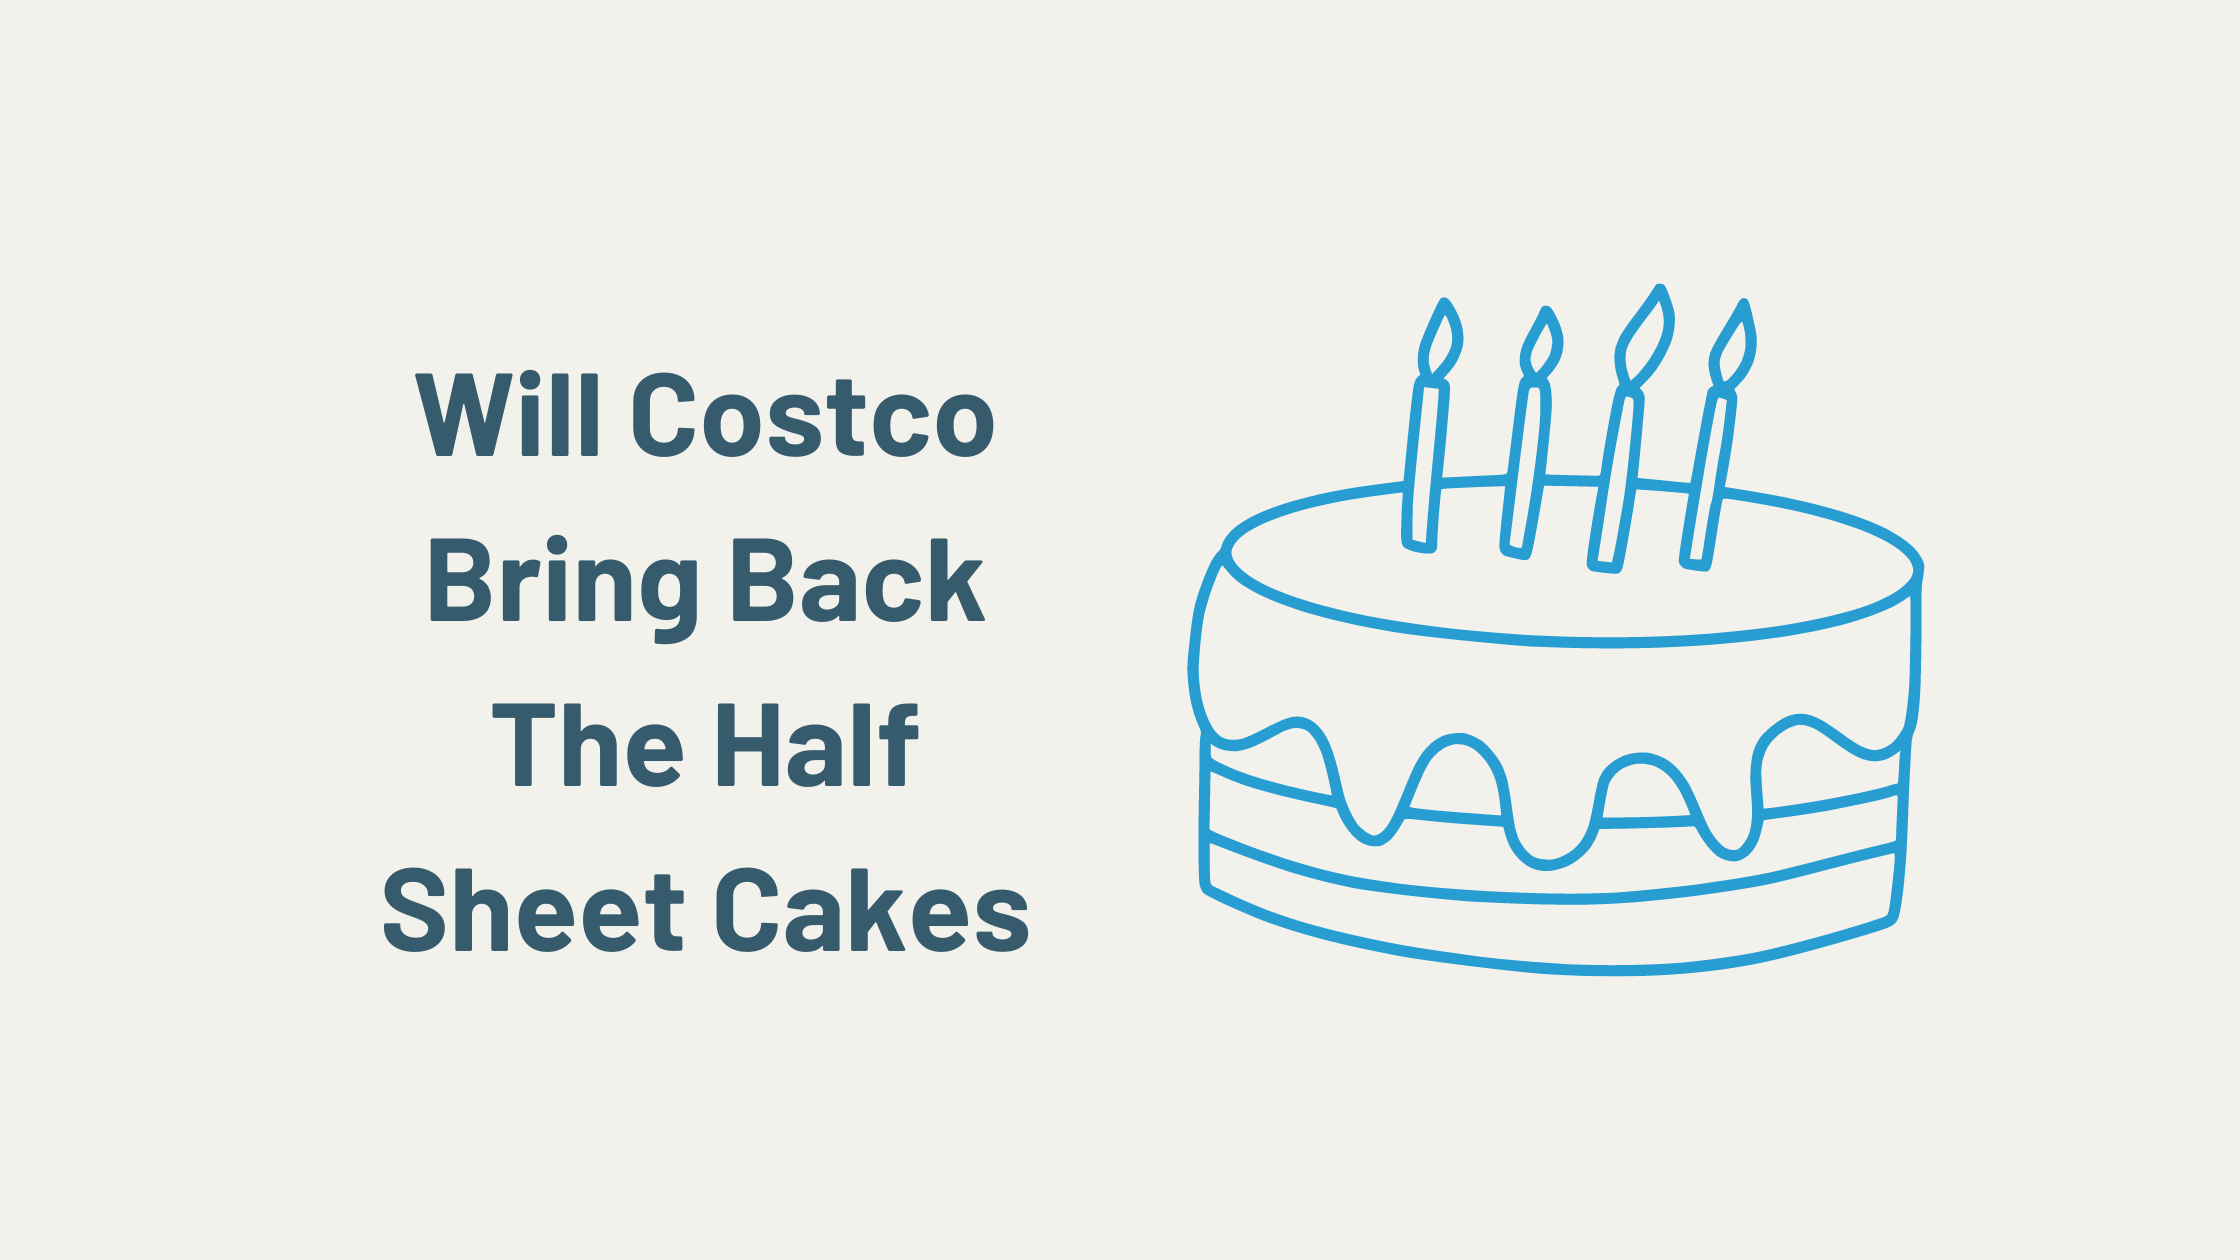 Will Costco Bring Back The Half Sheet Cakes